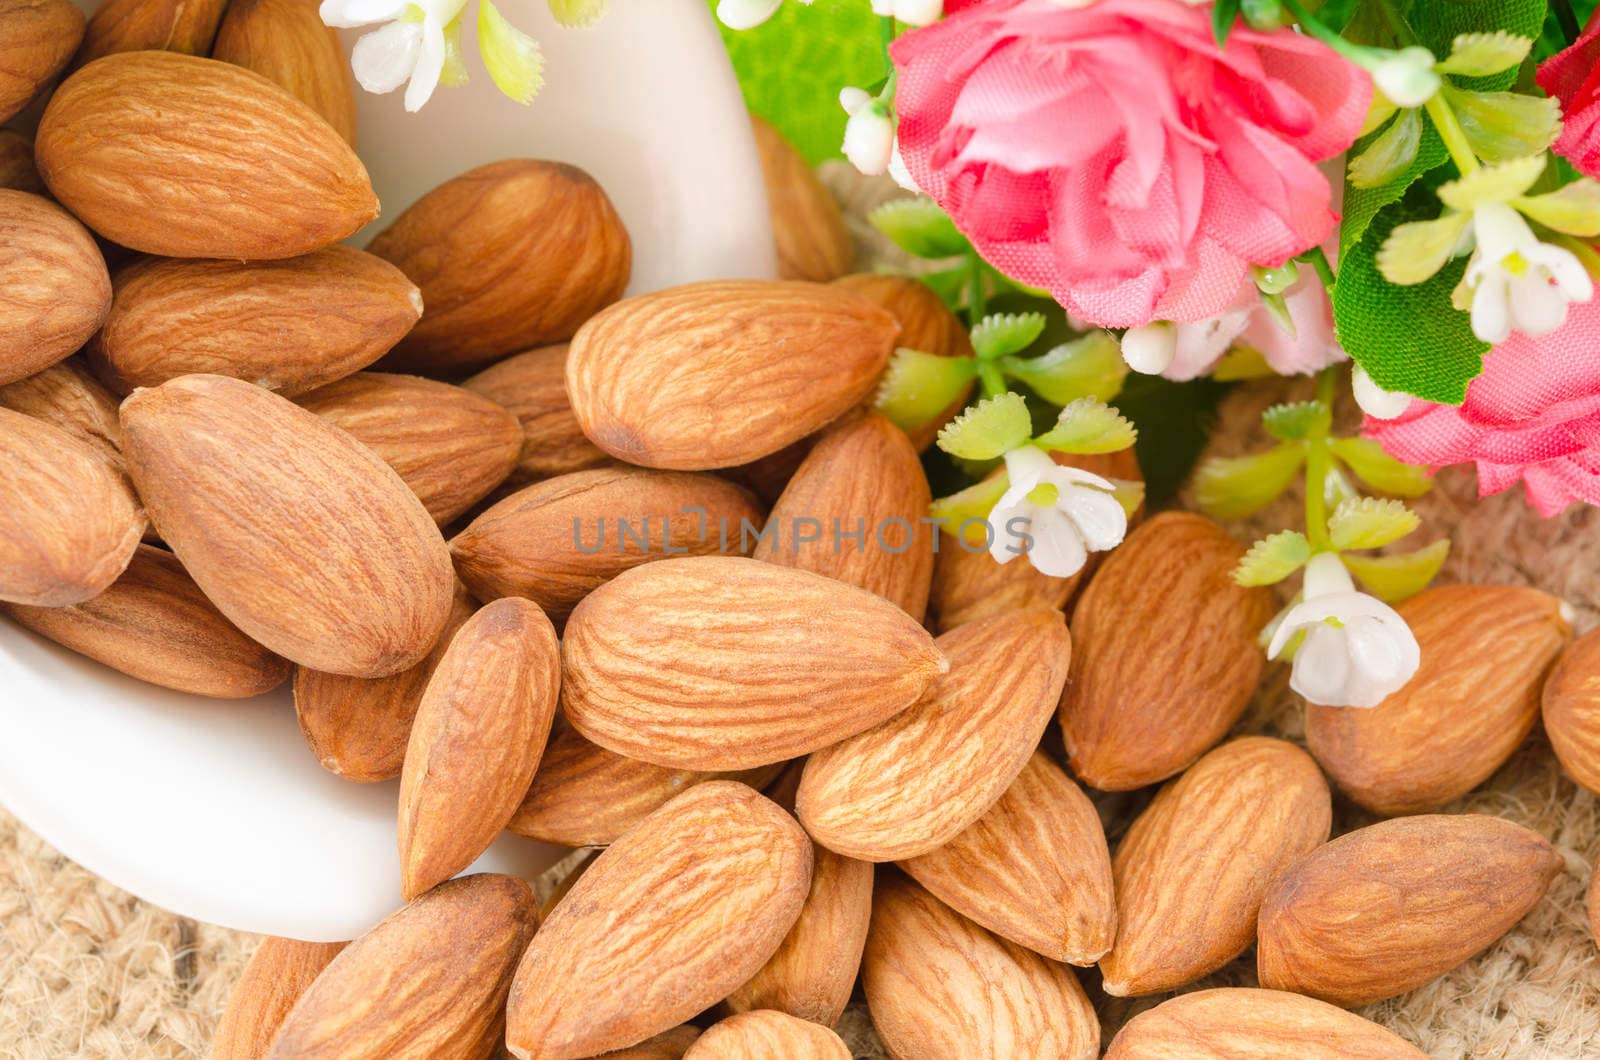 Almonds in white cup with pink flower on sack background.